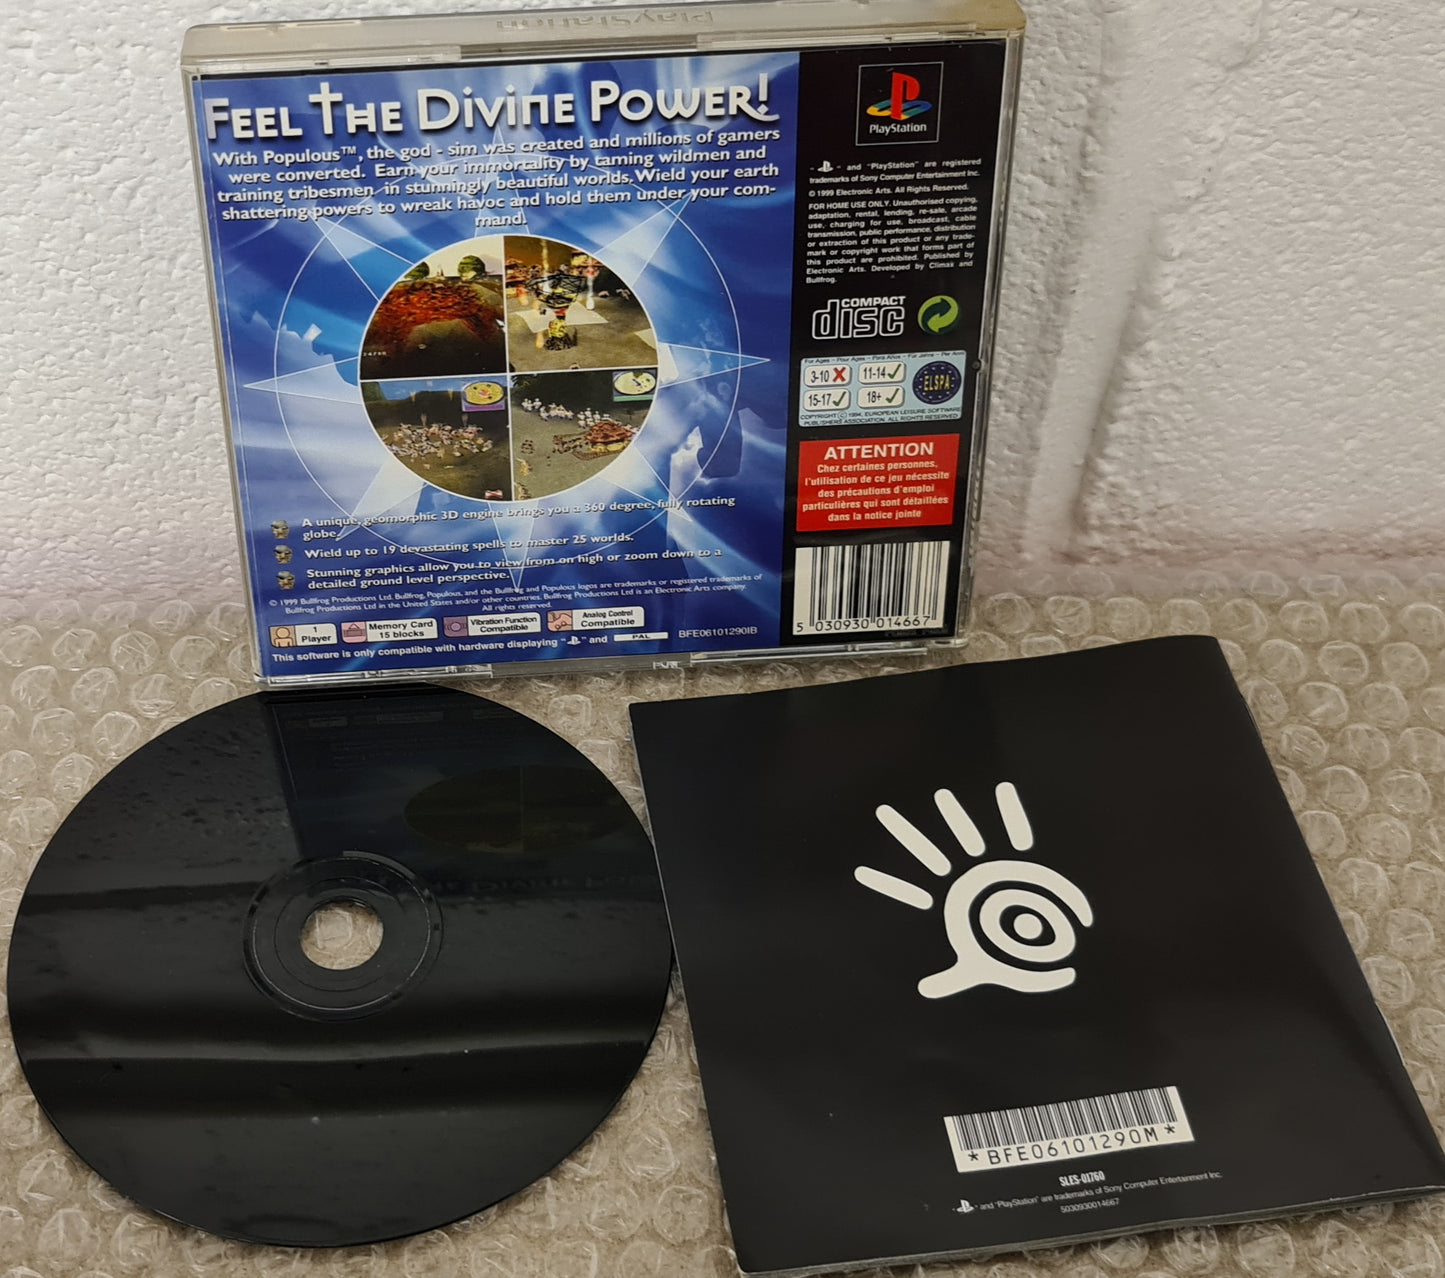 Populous the Beginning Sony Playstation 1 (PS1) Game